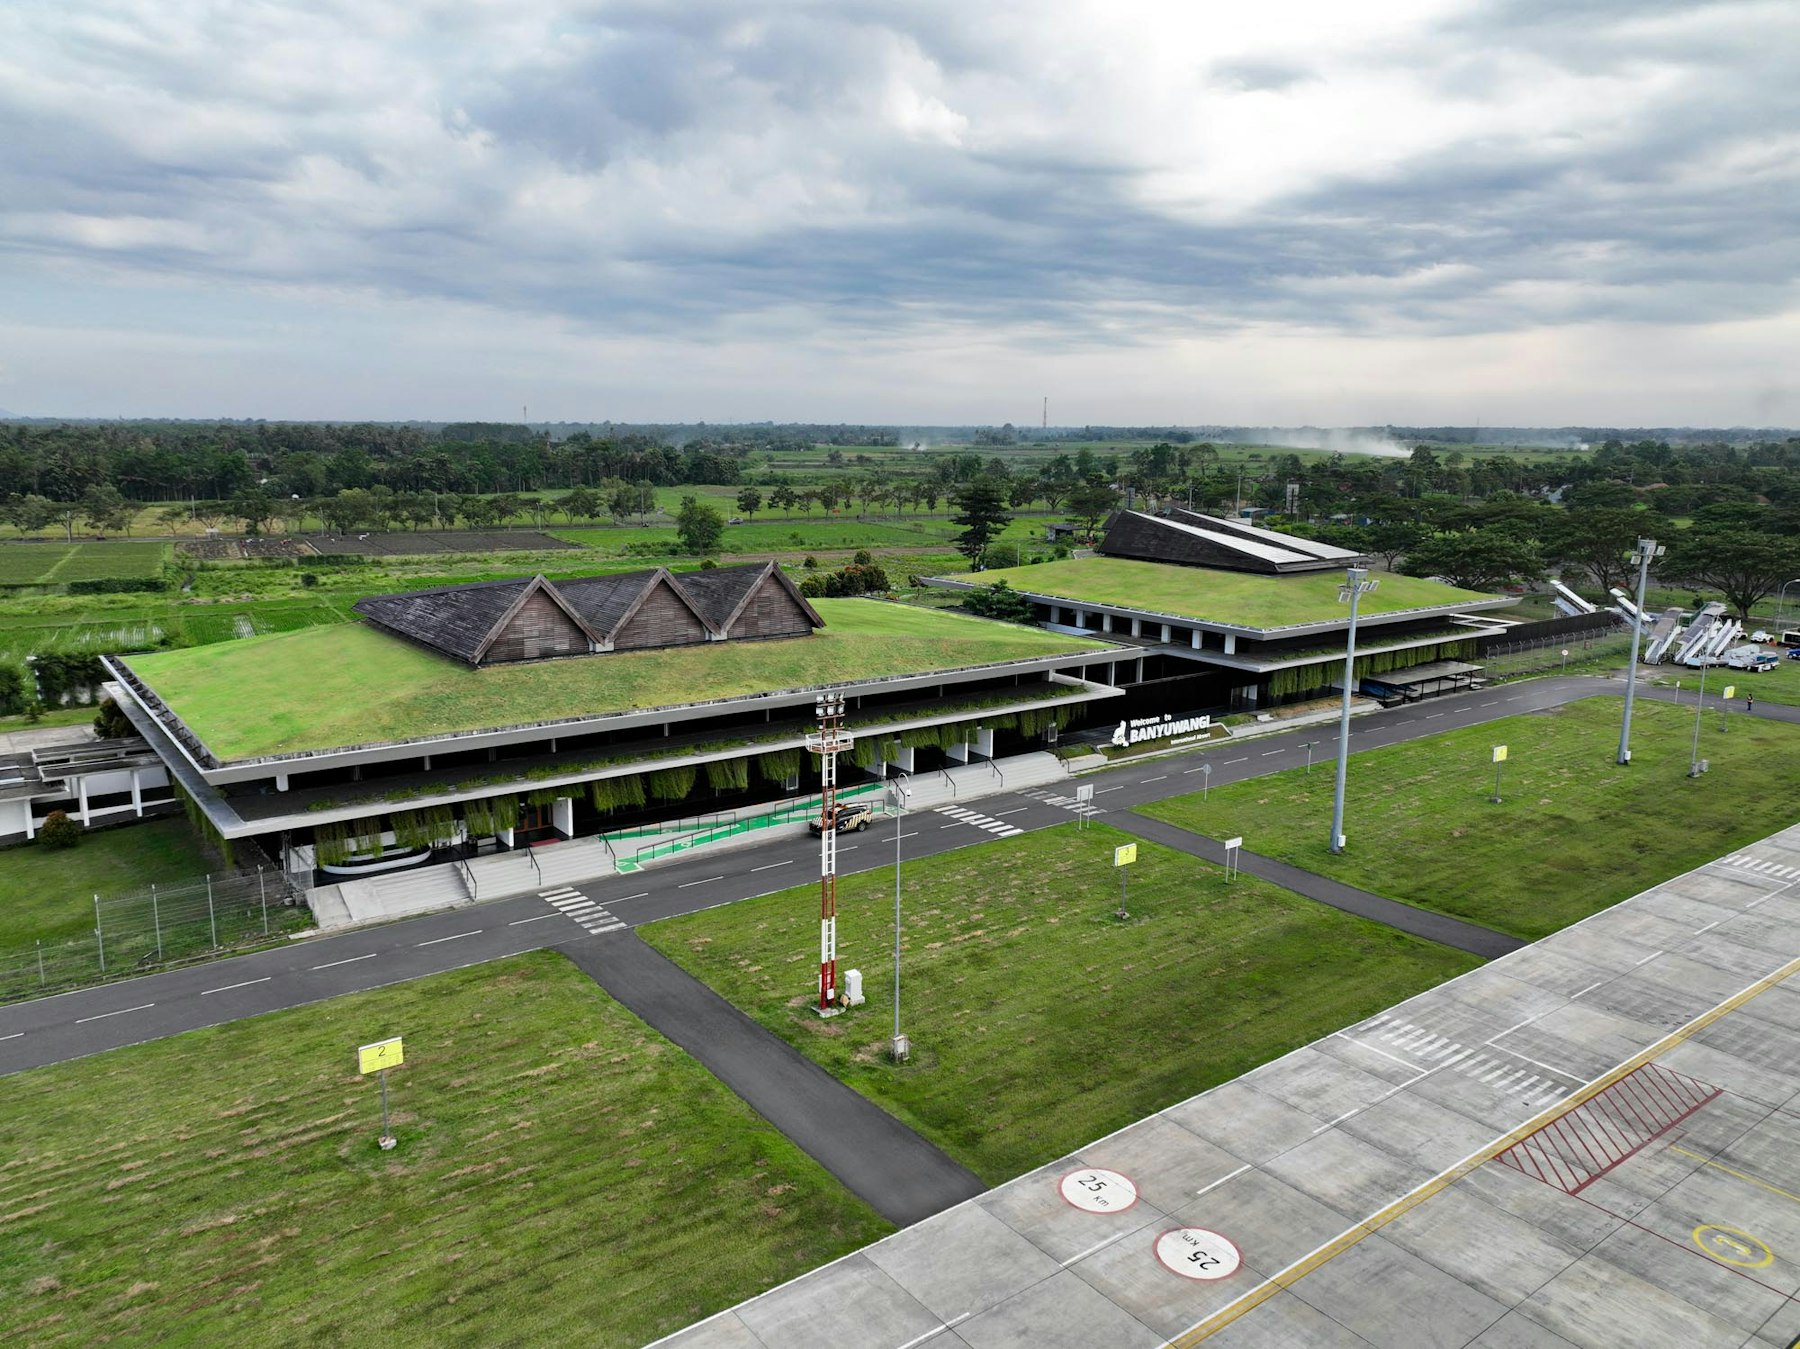 General view of the domestic airport that serves more than 1,100 passengers per day. | Aga Khan Trust for Culture / Mario Wibowo (photographer)